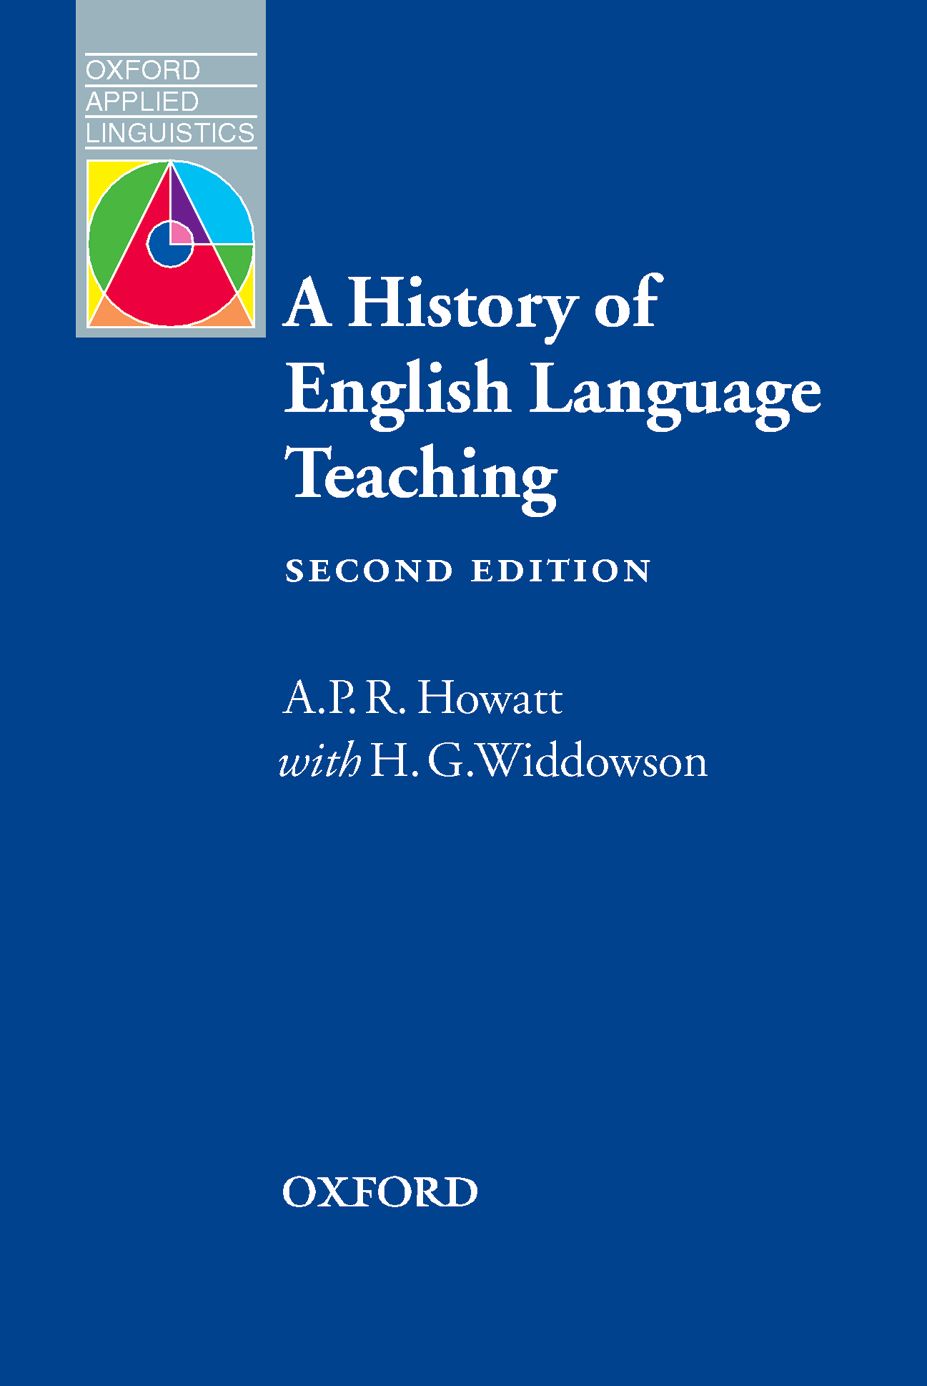 Oxford Applied Linguistics : A History of English Language Teaching 2nd ED